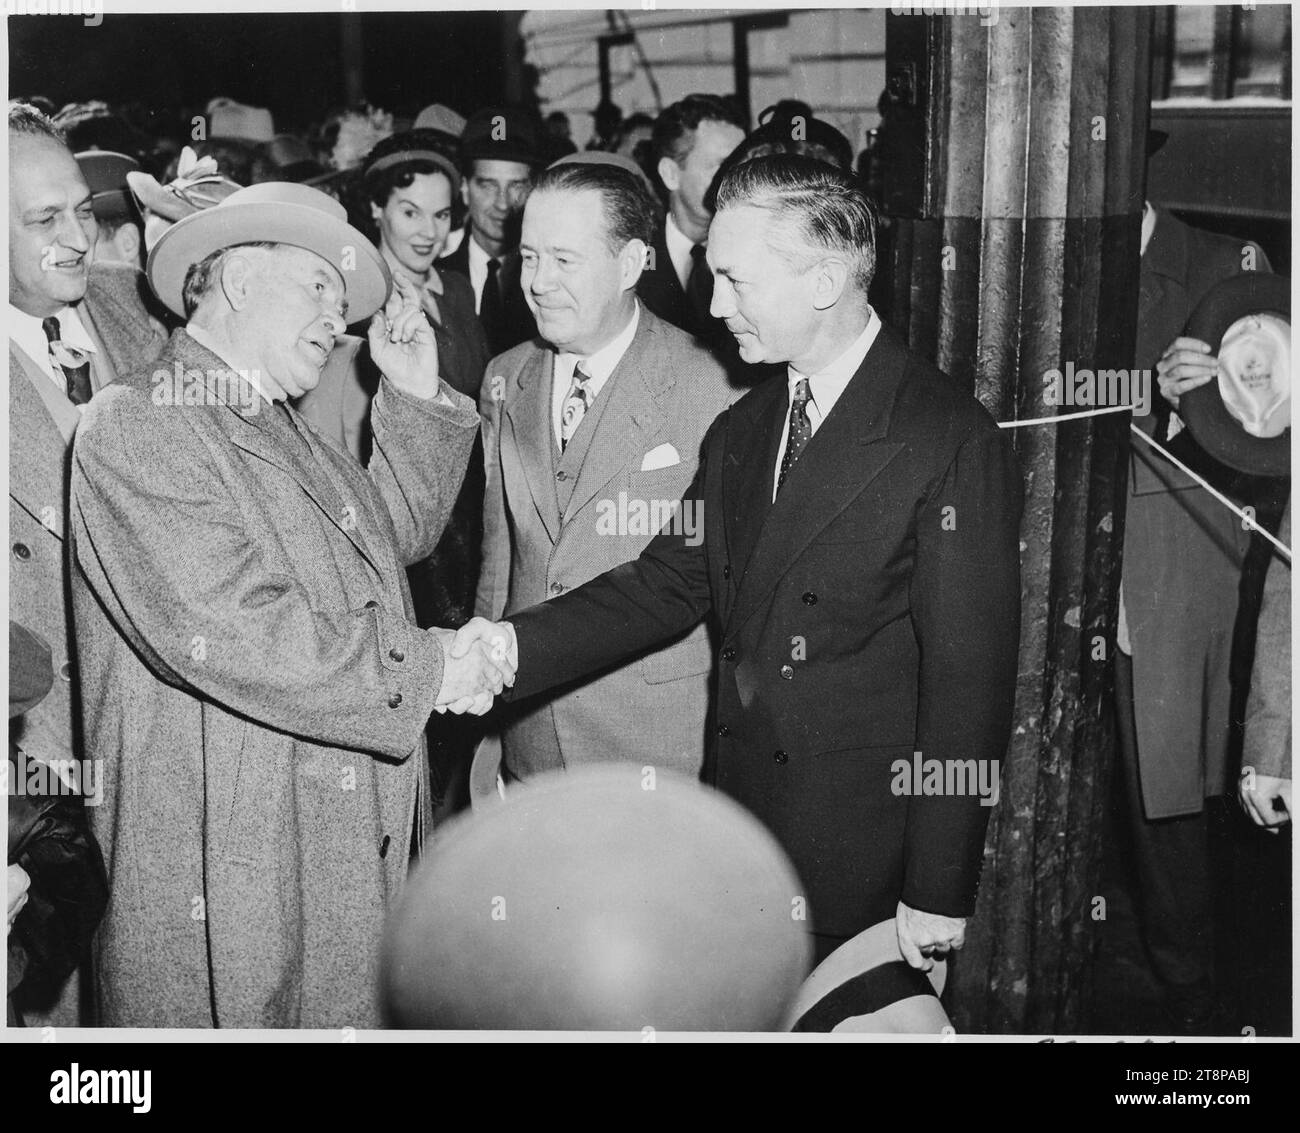 Vice President-elect Alben W. Barkley shakes hands with James V. Forrestal, with others looking on. - Stock Photo